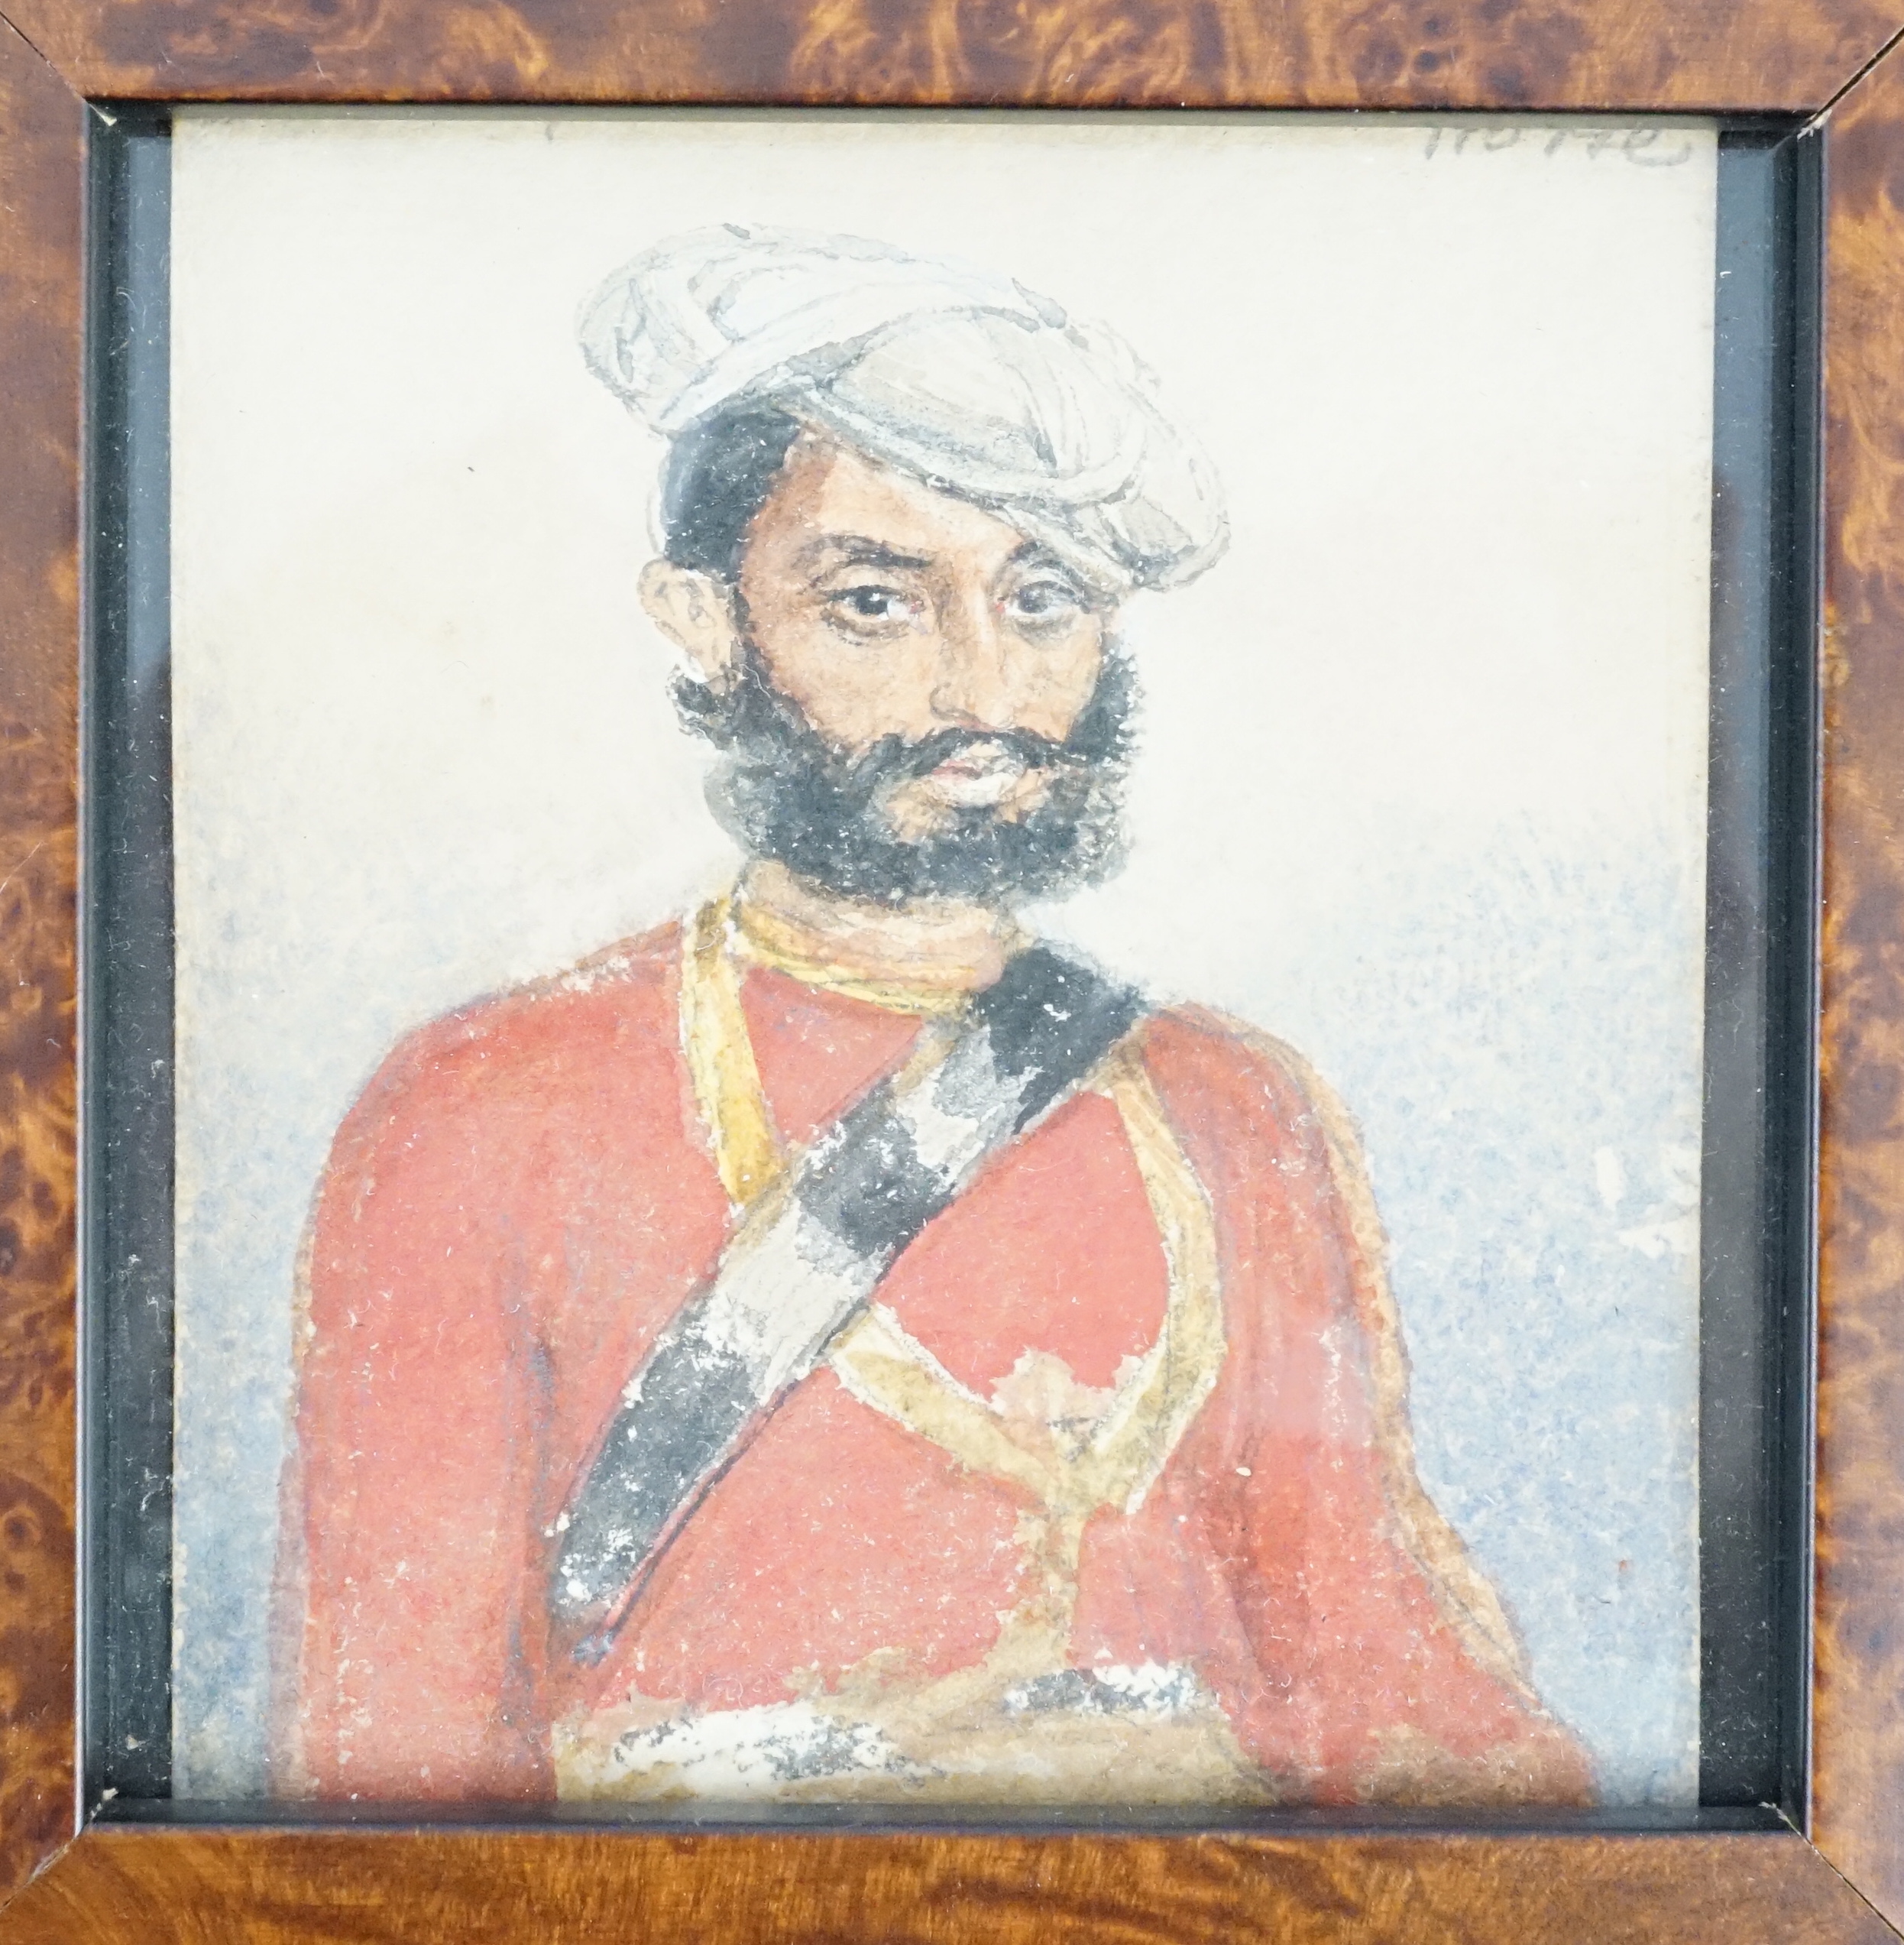 Anglo Indian School c.1850 , Portrait miniature of an Indian Officer of the South Mahratta Irregular Horse, c.1849, watercolour on paper, 10.25 x 8cm.